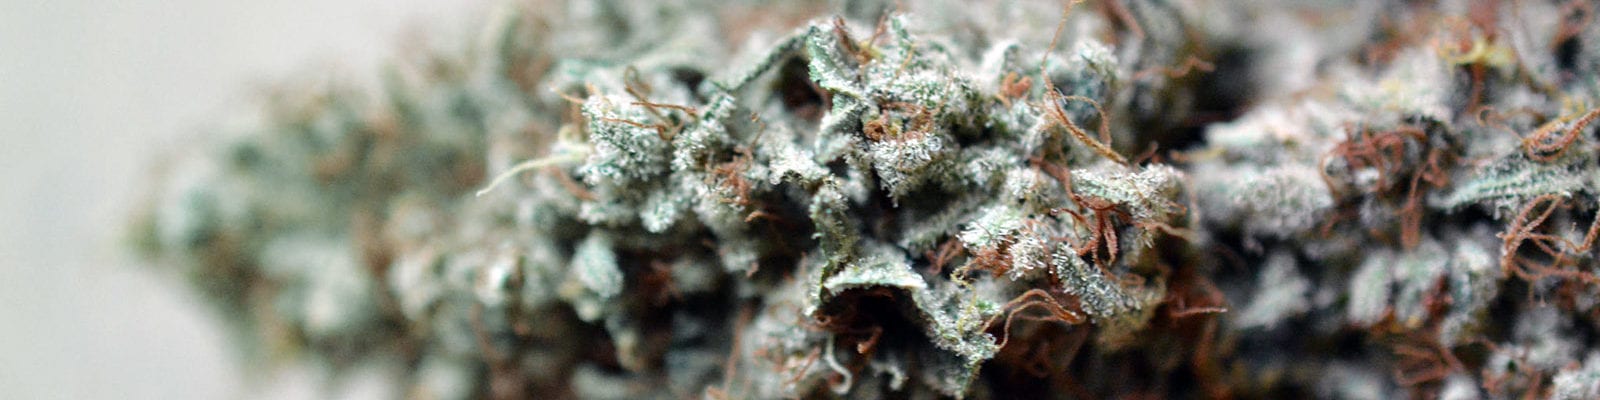 Micro photograph of a trimmed cannabis nug lying on its side.